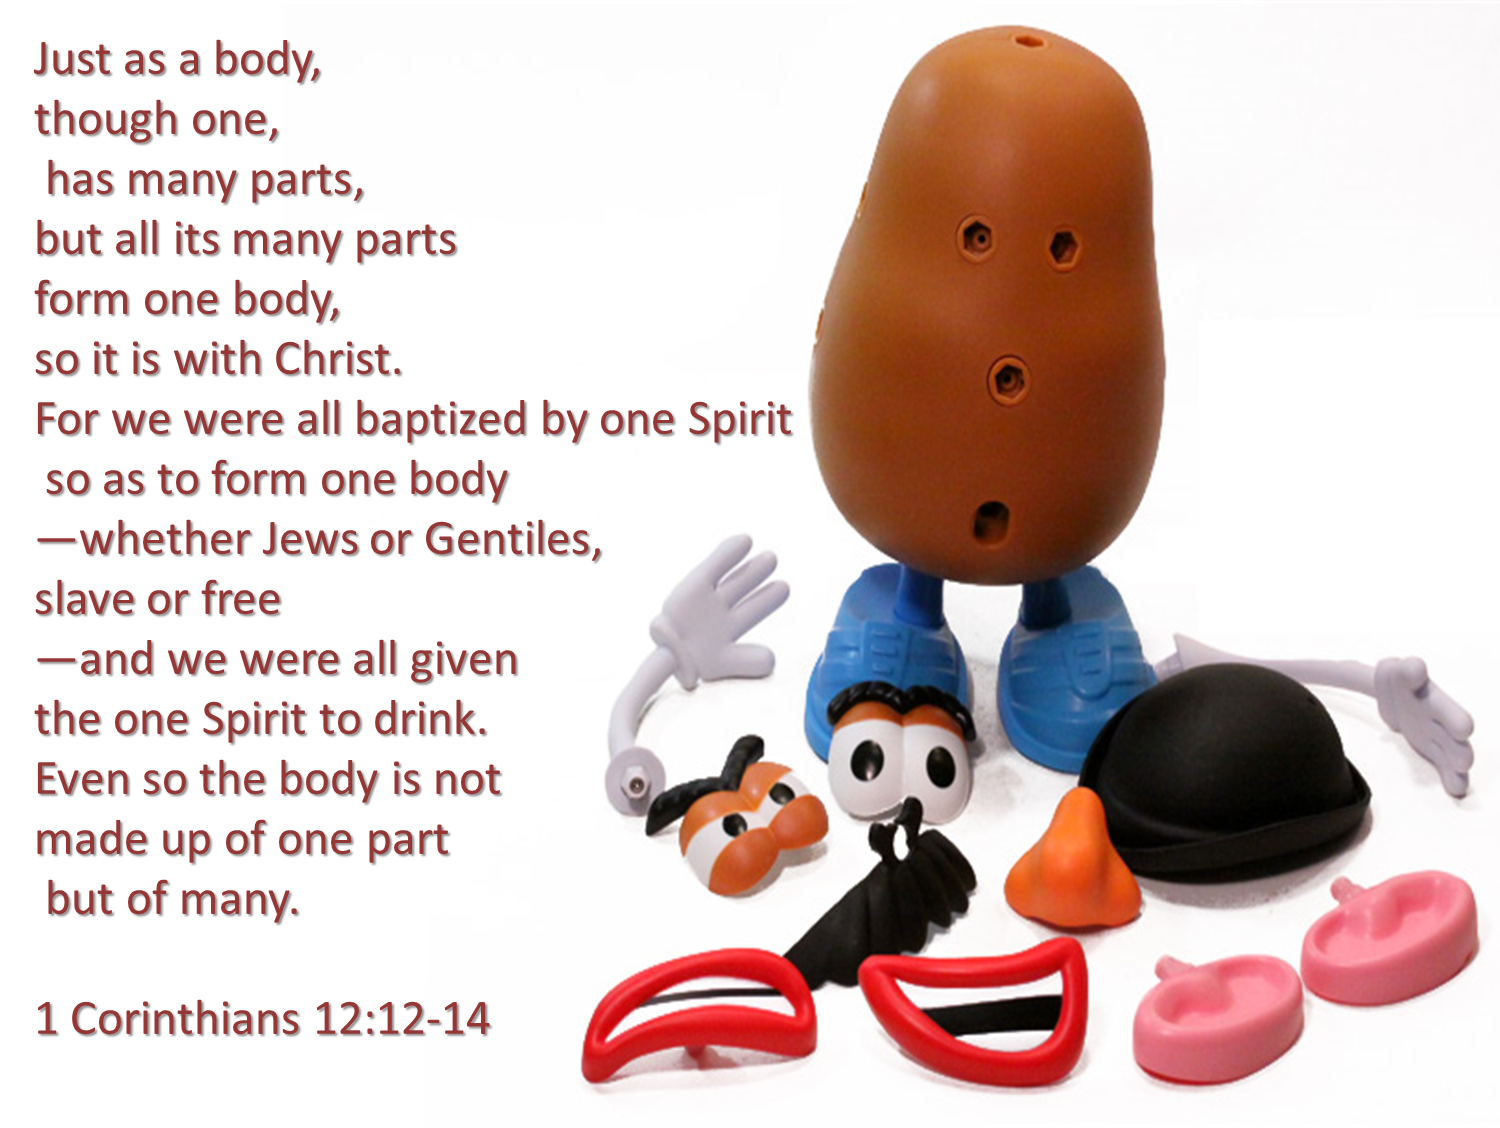 http://theology.geek.nz/2013/08/difference-in-worship-many-parts-one-body-empowered-by-the-one-spirit-1-corinthians-1212-34-one-on-the-road-to-unity-in-1-corinthians-part/